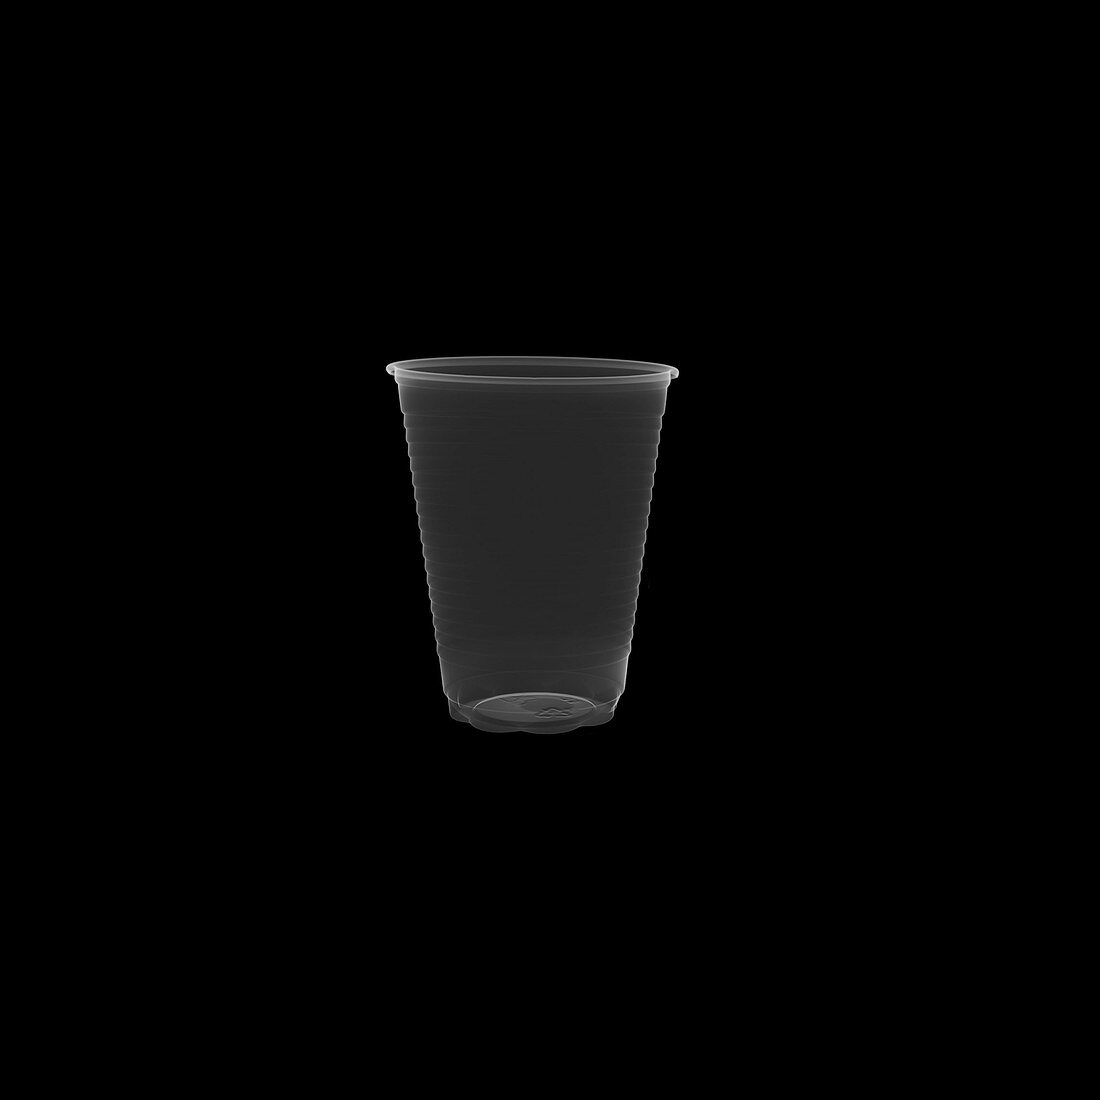 Plastic cup, X-ray